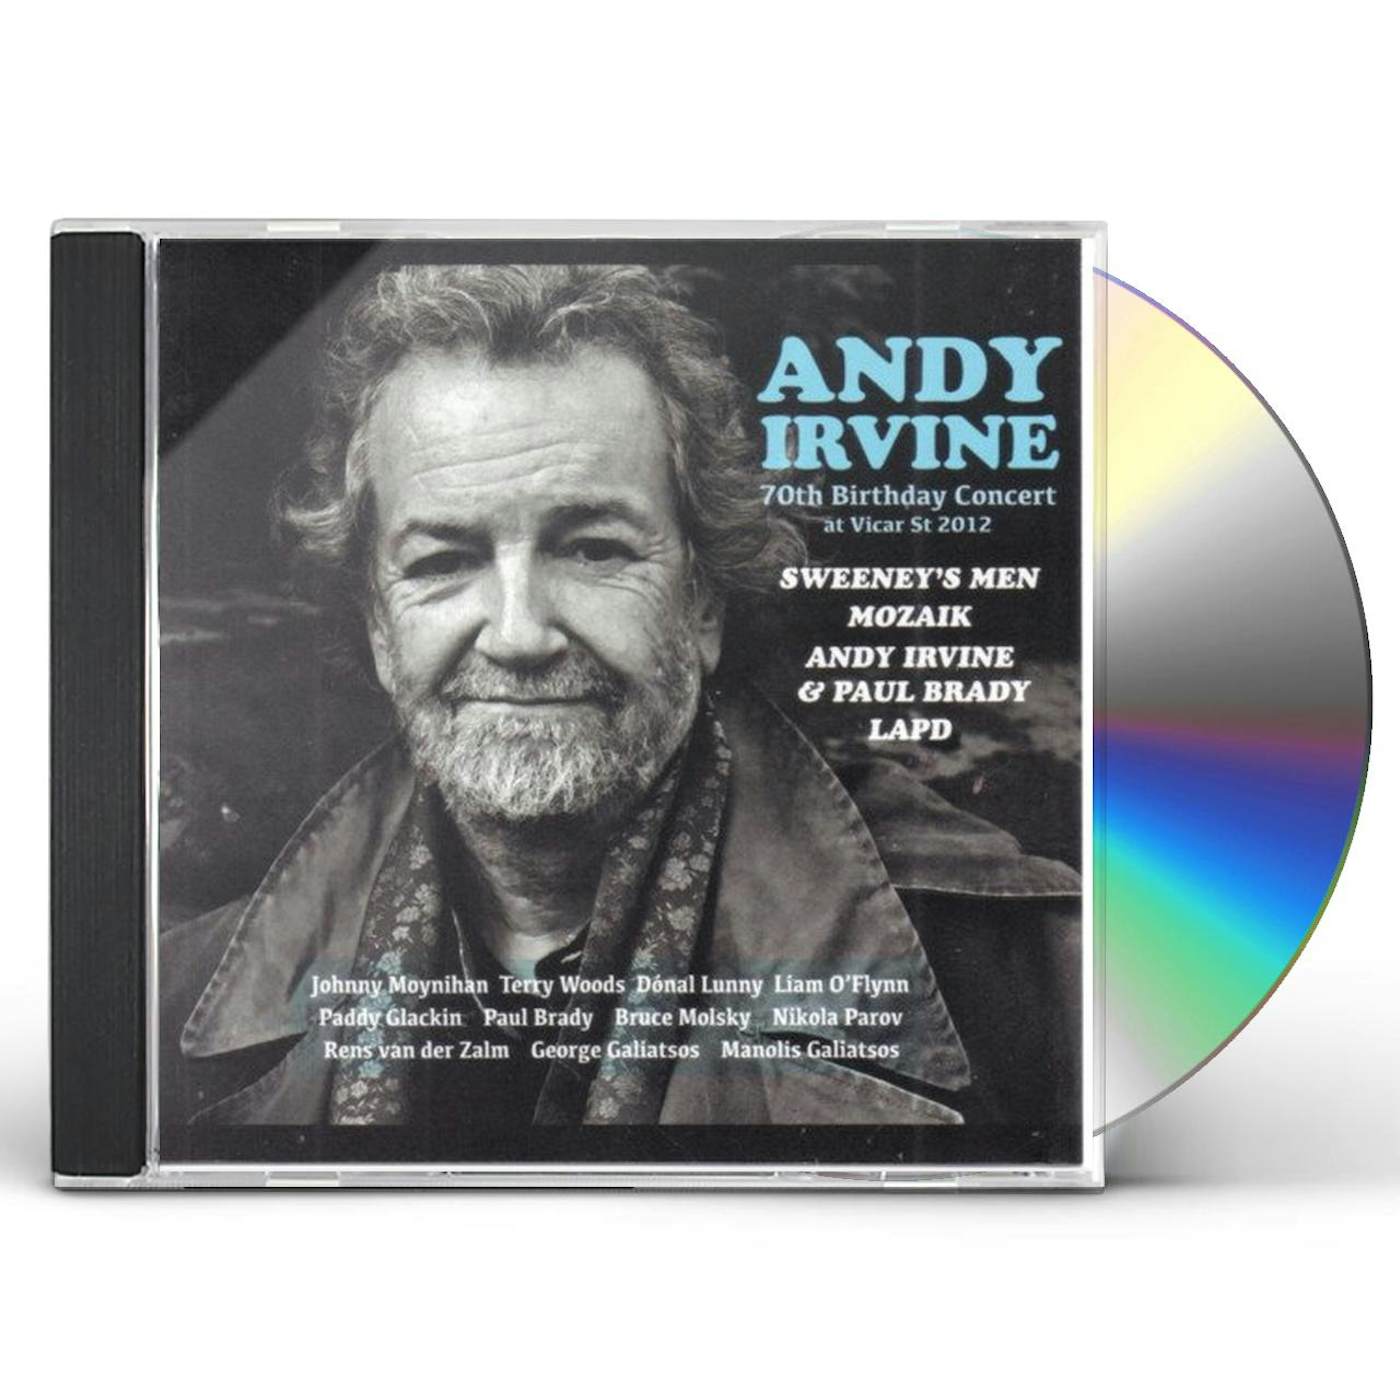 Andy Irvine 70TH BIRTHDAY CONCERT AT VICAR ST 2012 CD